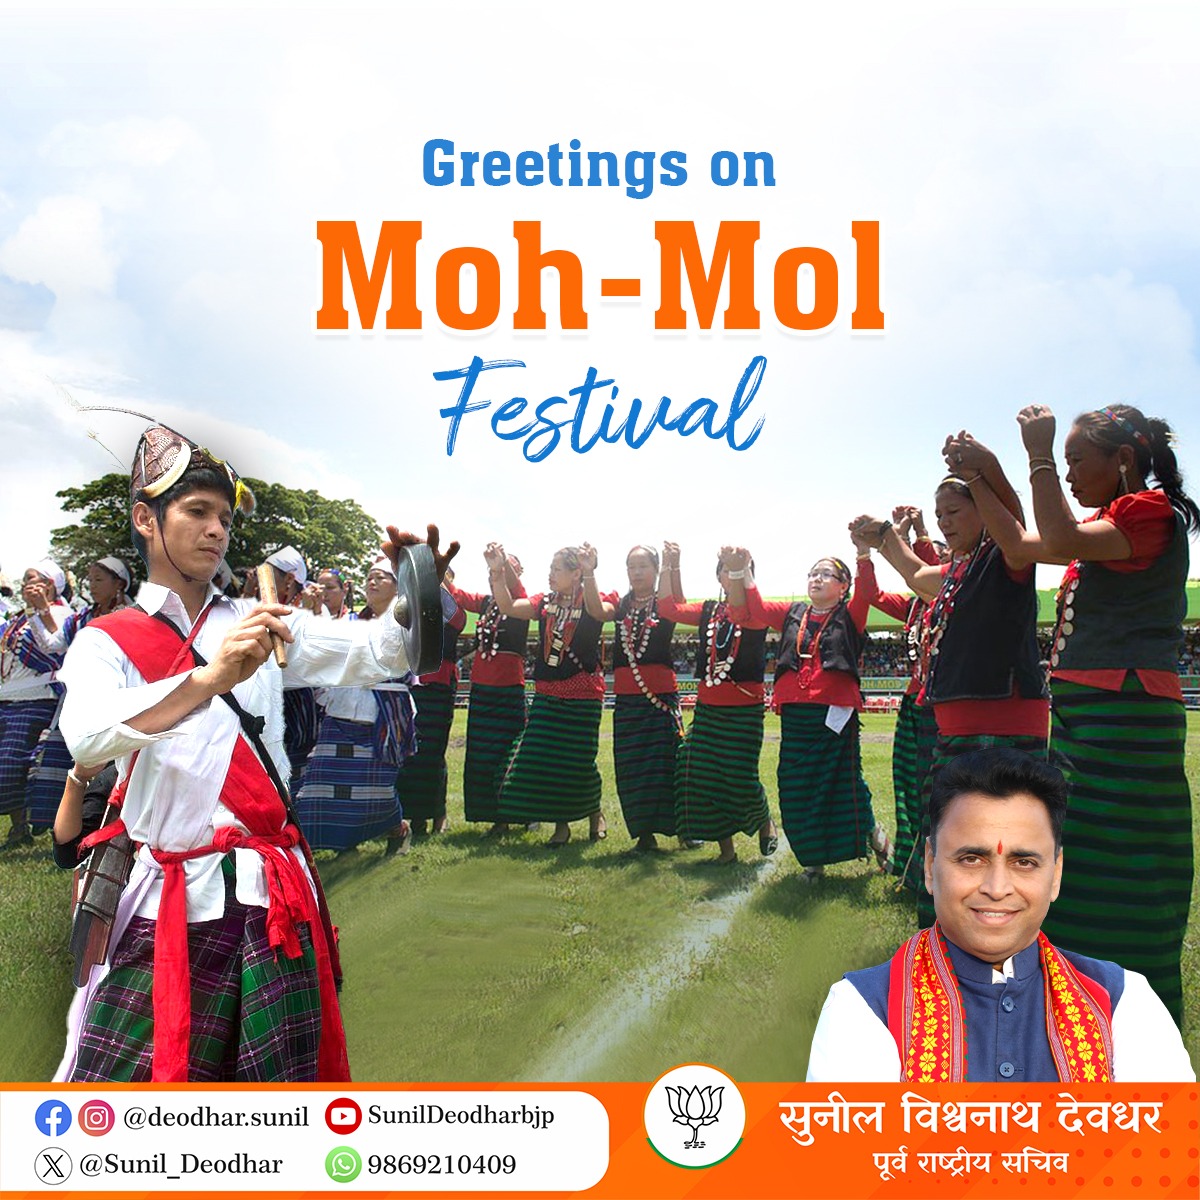 Warm wishes to my fellow Tangsa community as we celebrate Moh-Mol, a time to reap the rewards of our hard work in the fields. May this harvest season bring abundant blessings & joy to all.
#MohMol